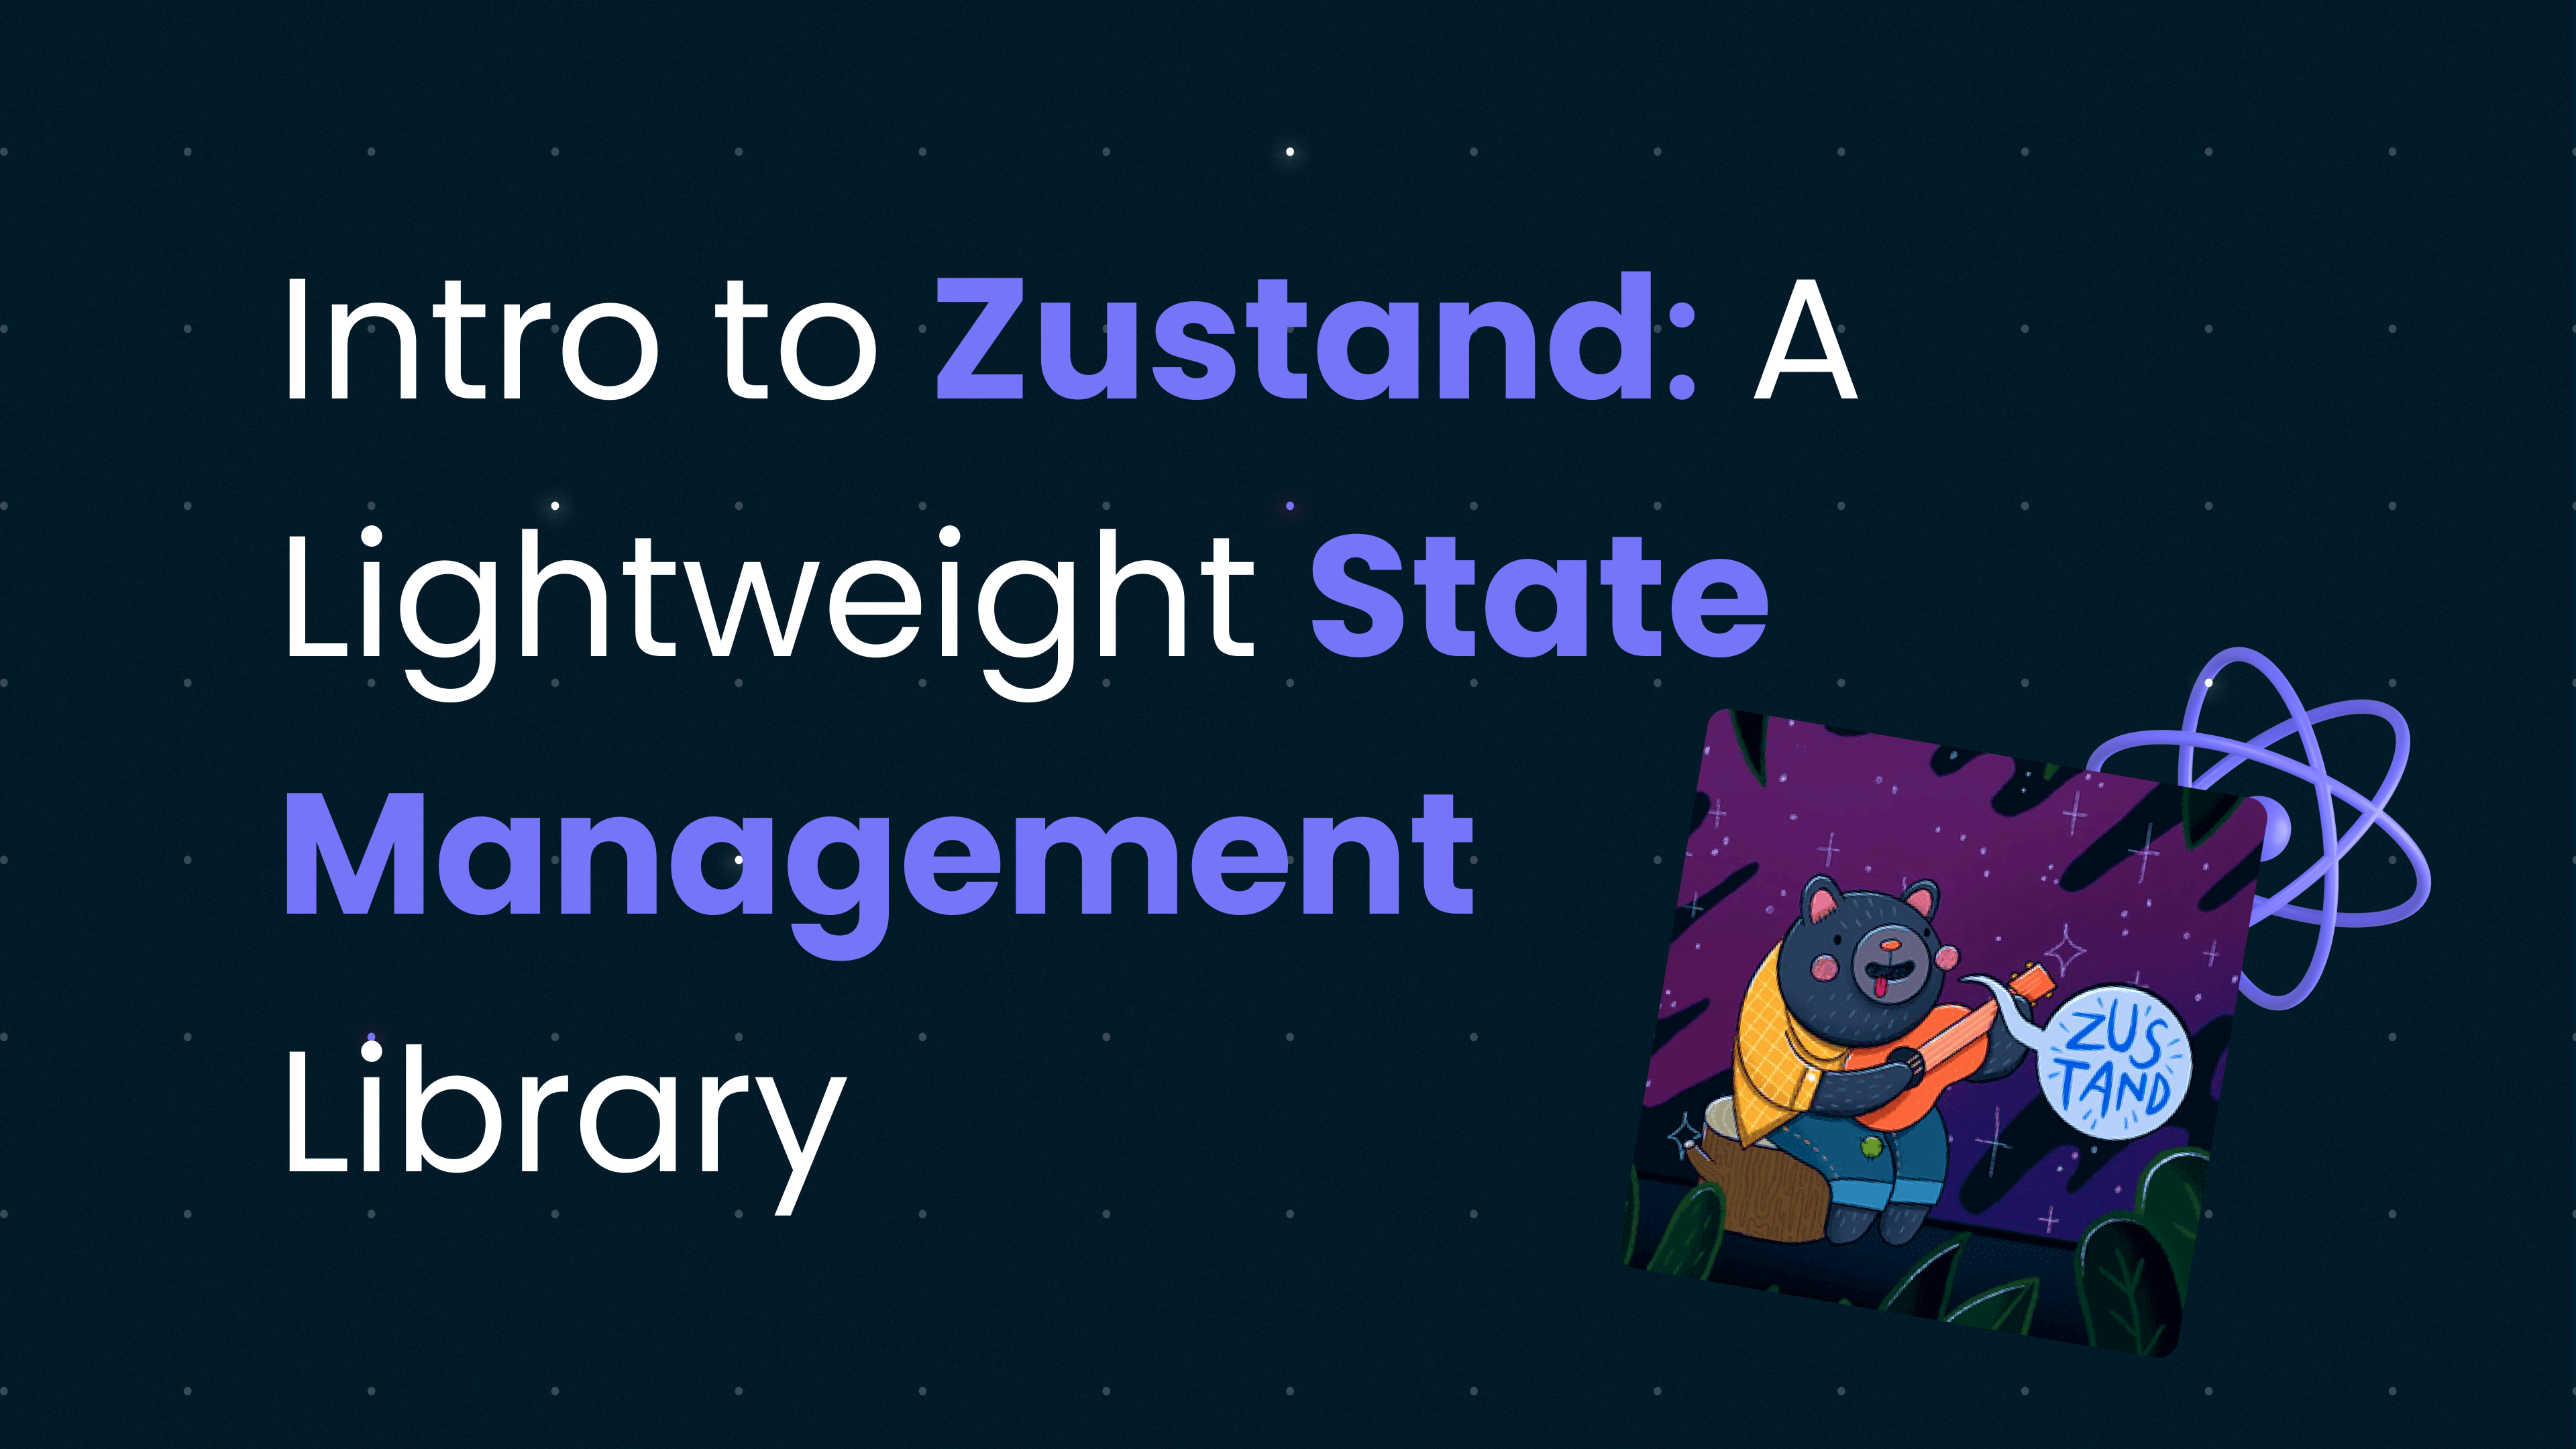 Introduction to Zustand: A Lightweight State Management Library